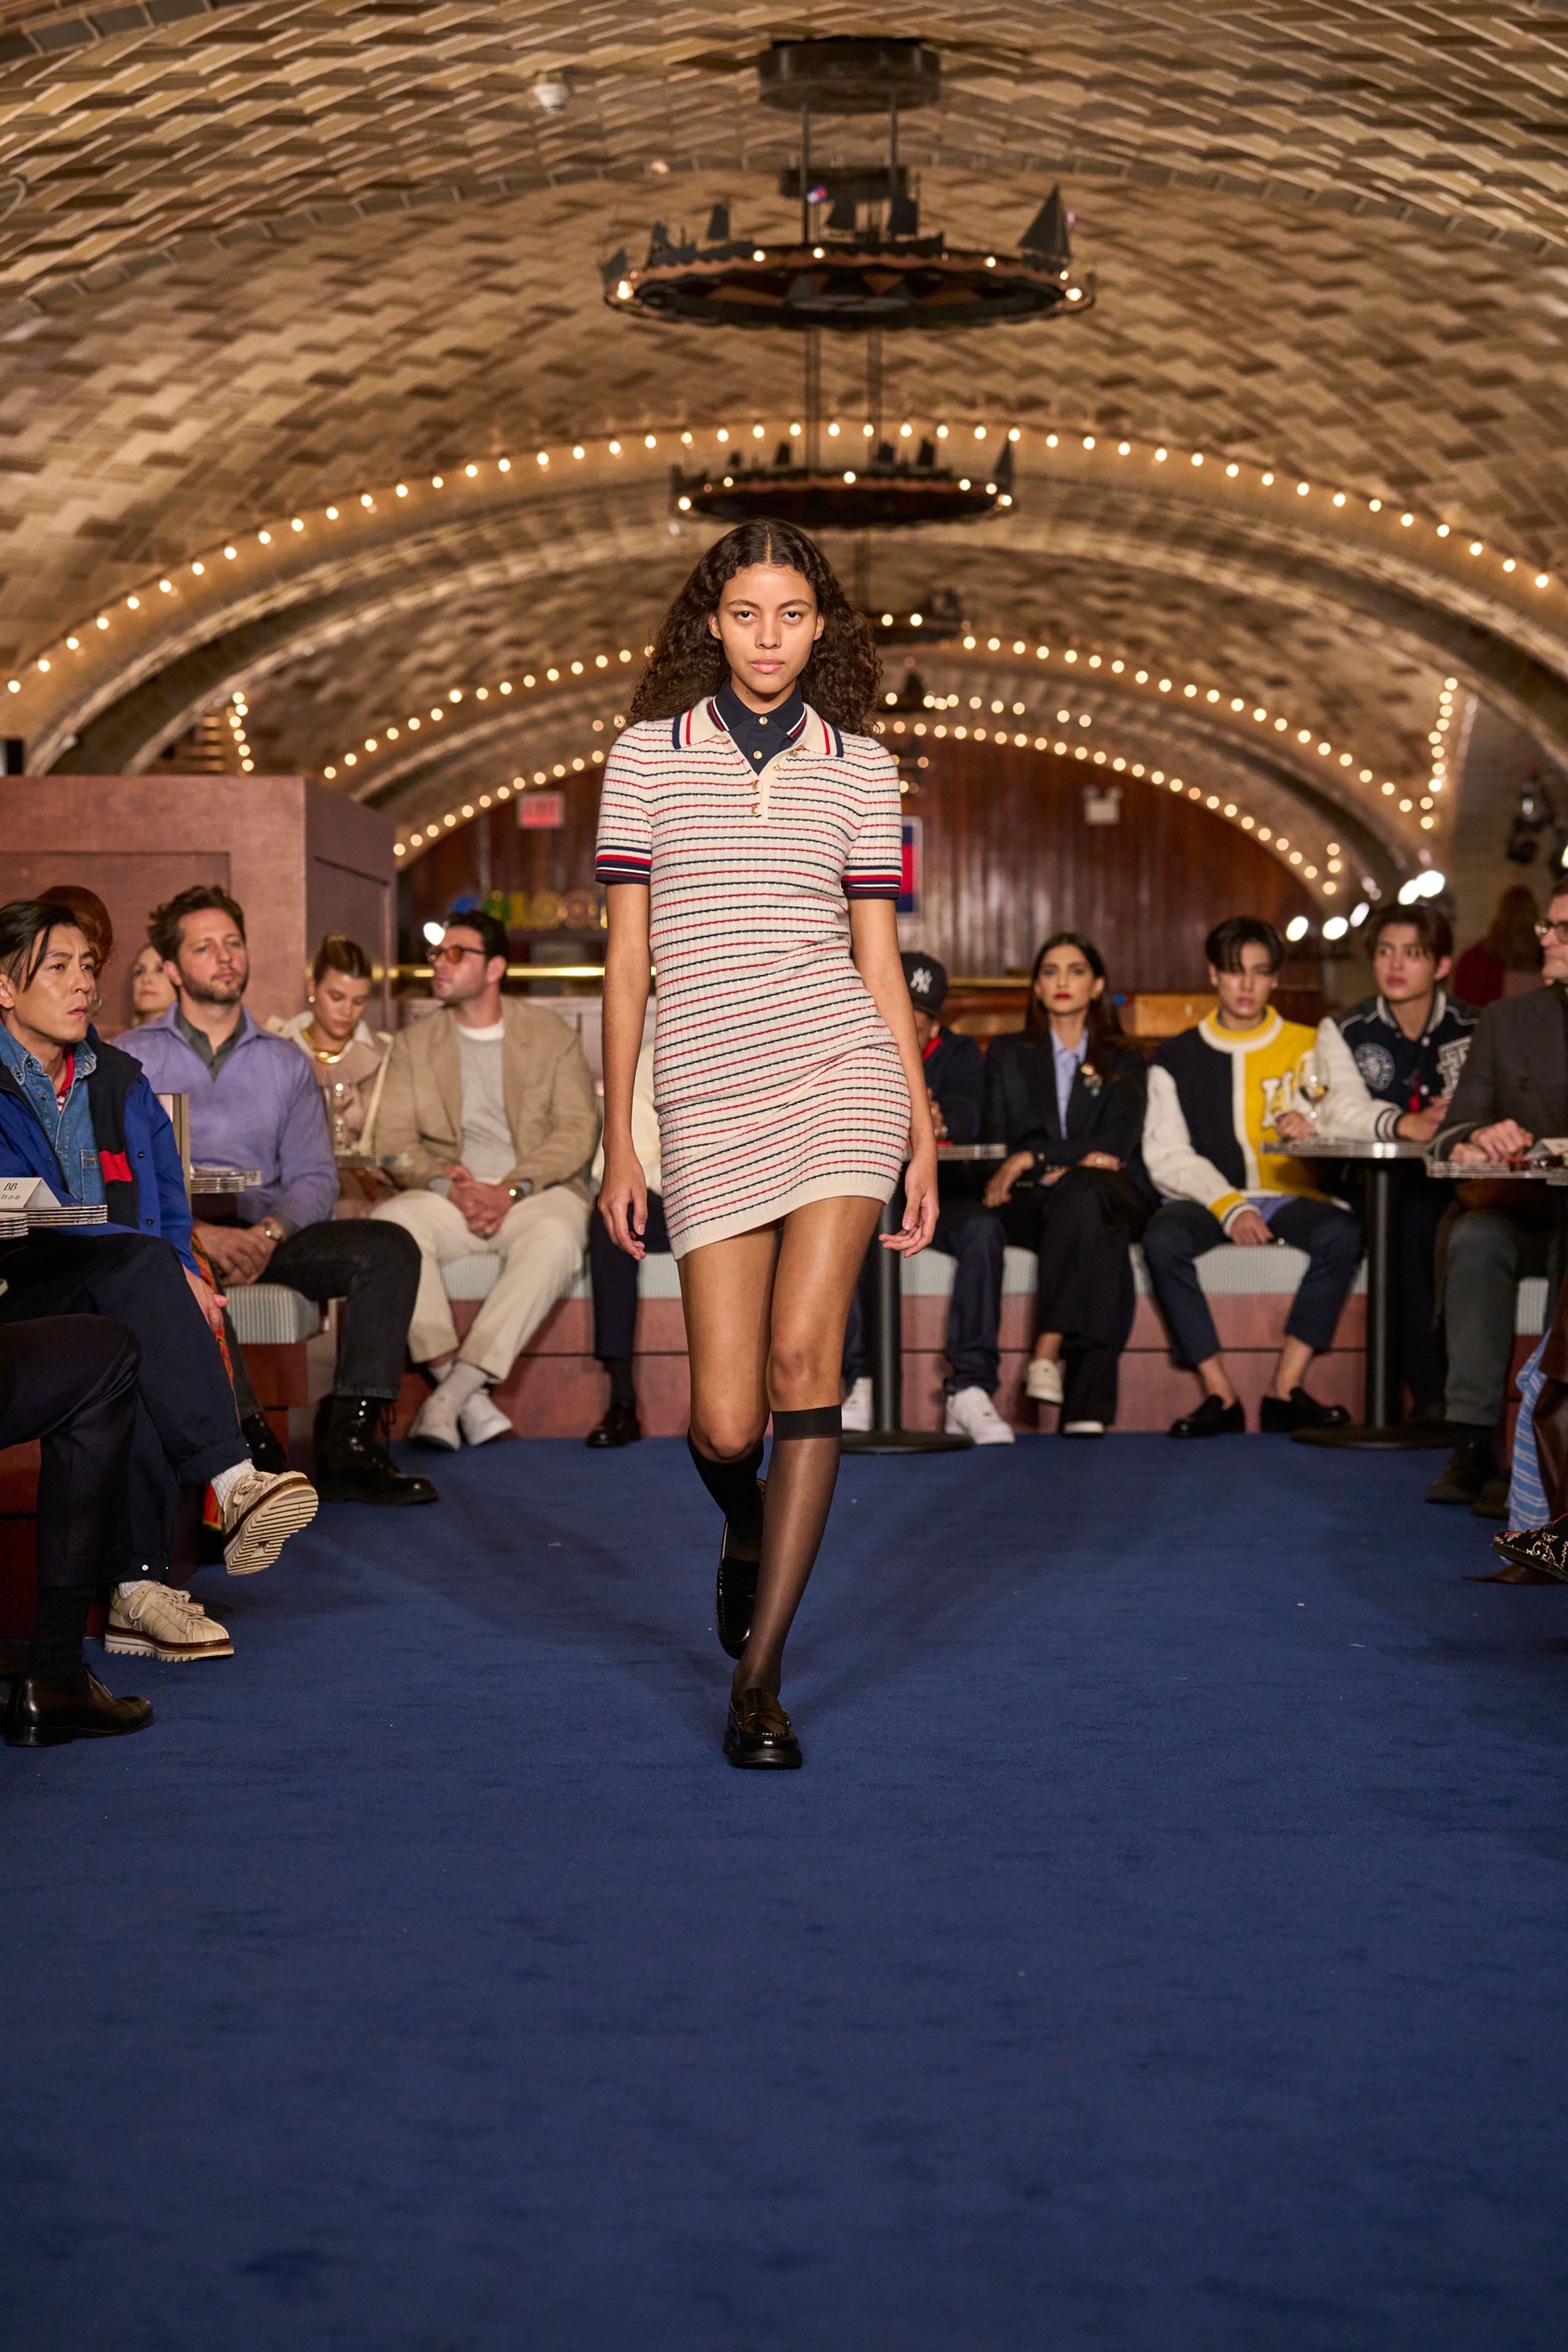 Tommy Hilfiger's homecoming show sets stage for all-American new chapter